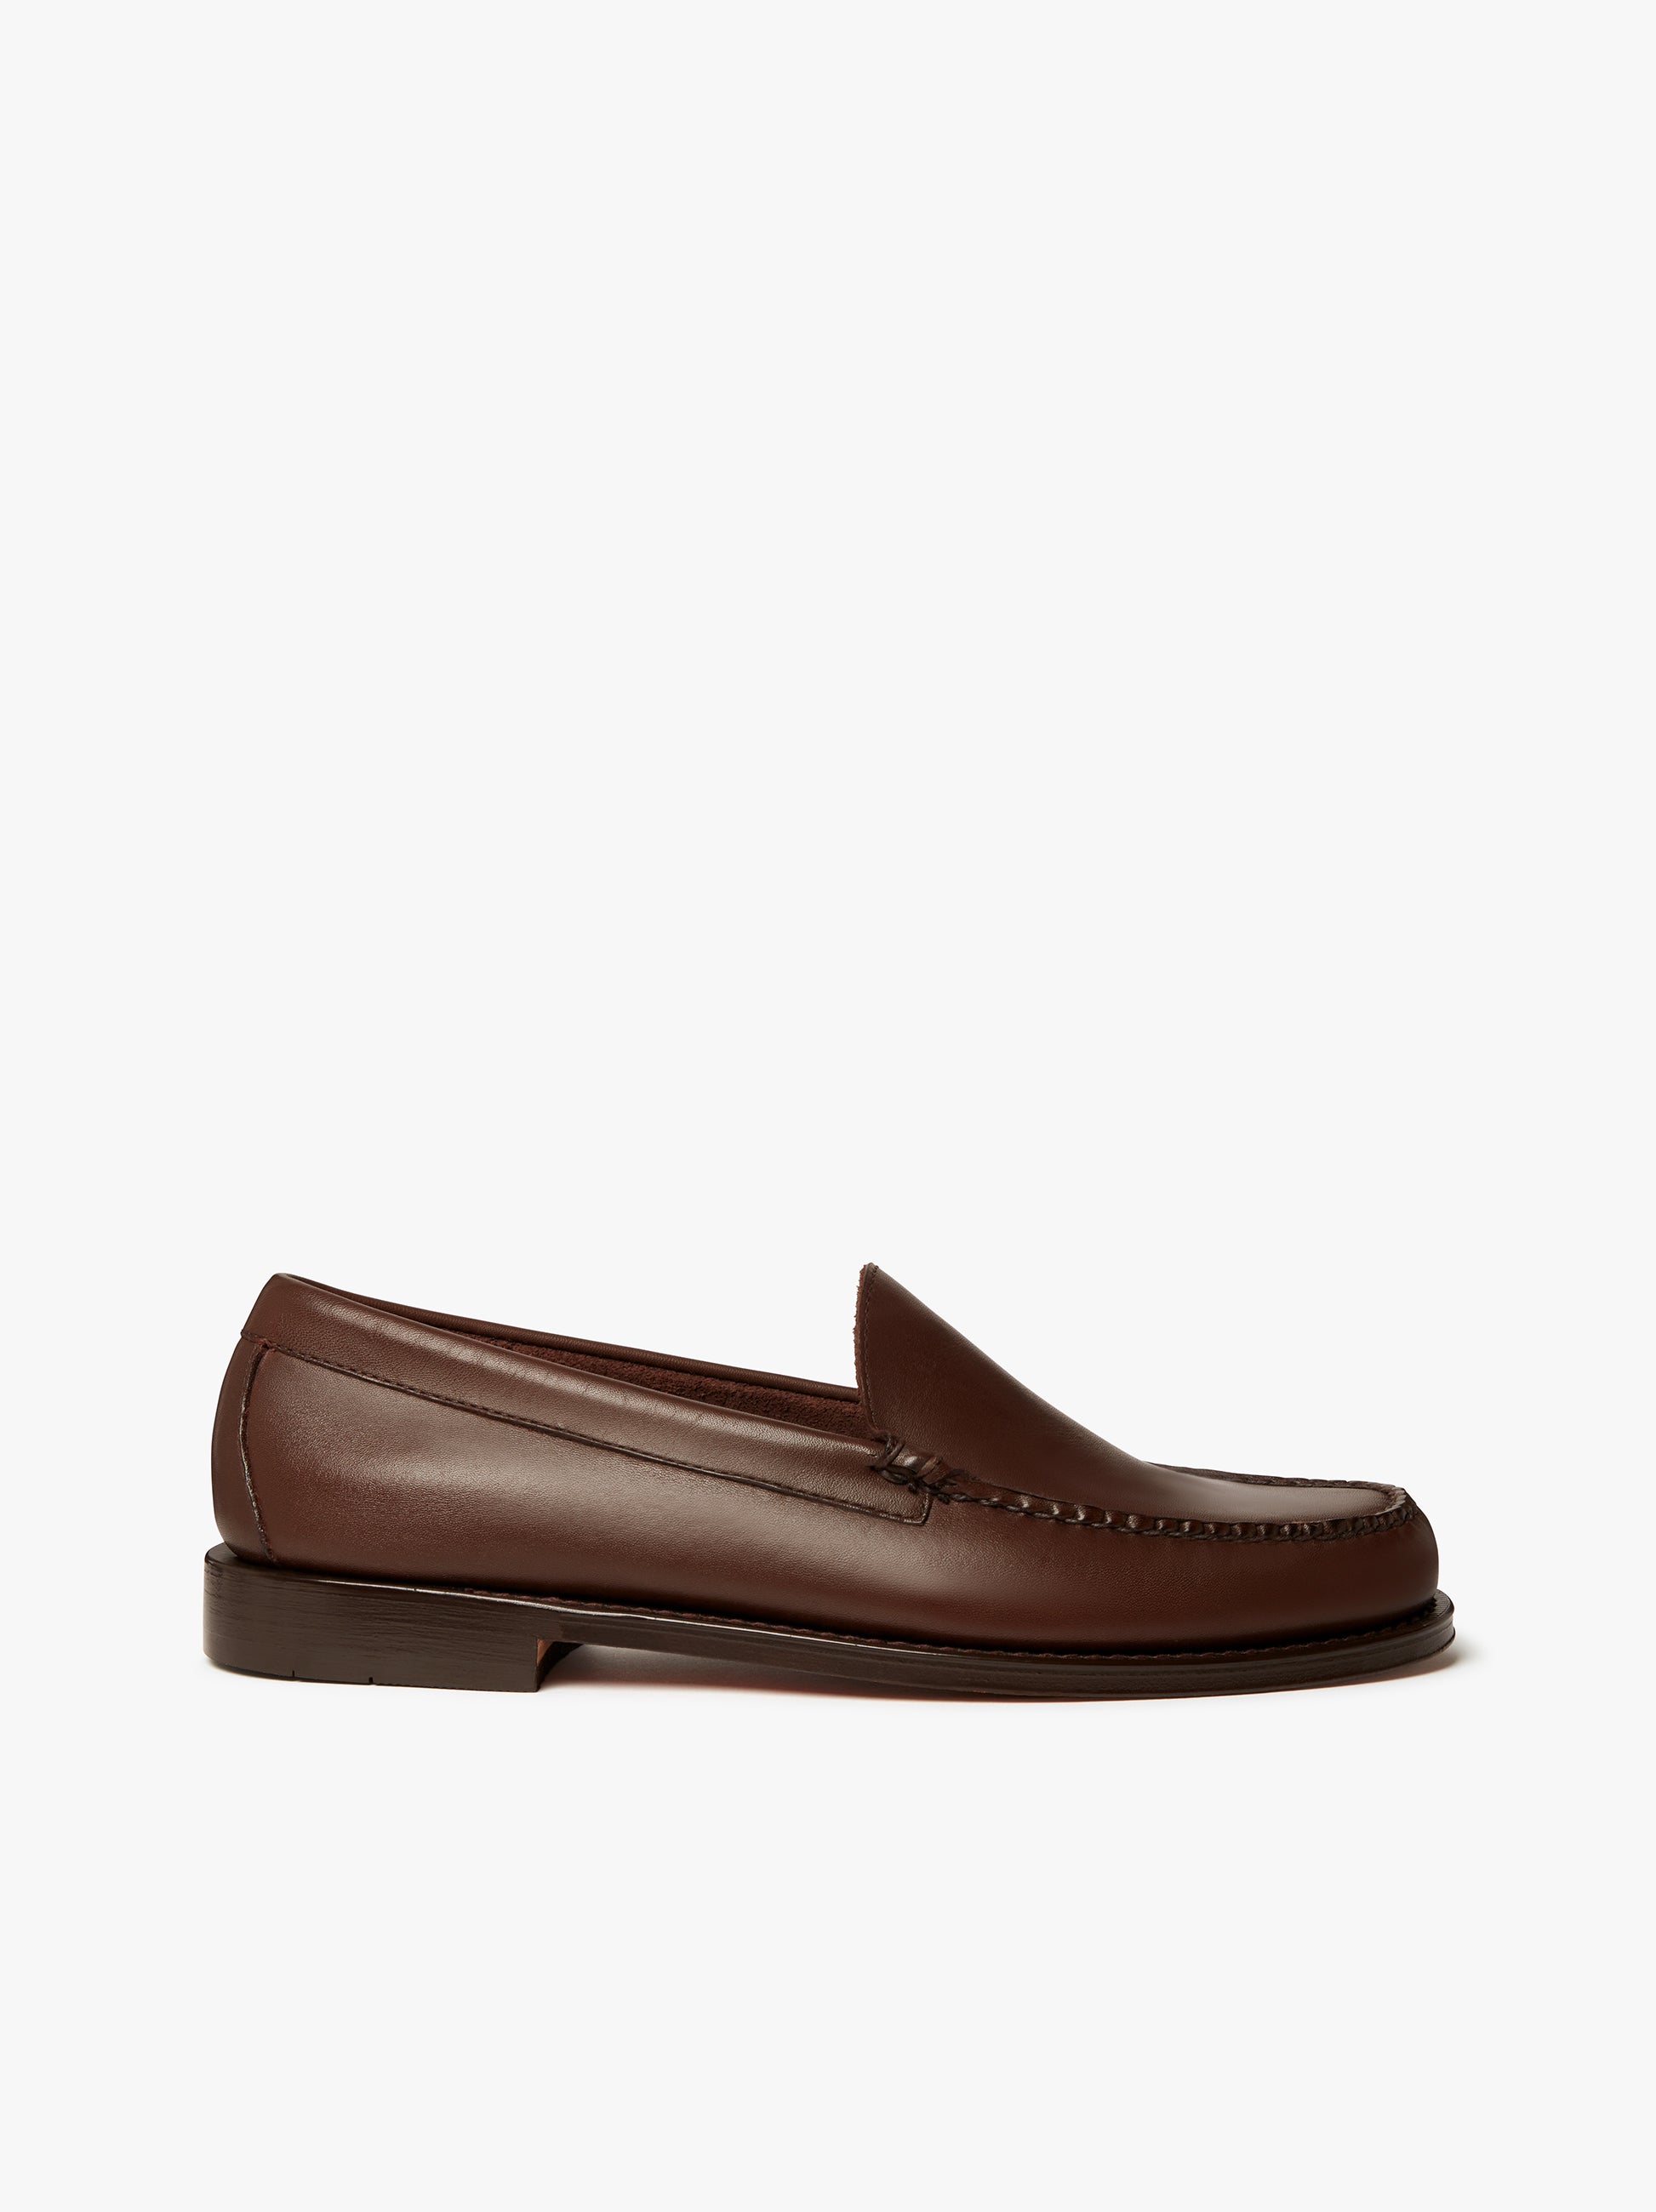 Weejuns Venetian Loafers – G.H.BASS 1876